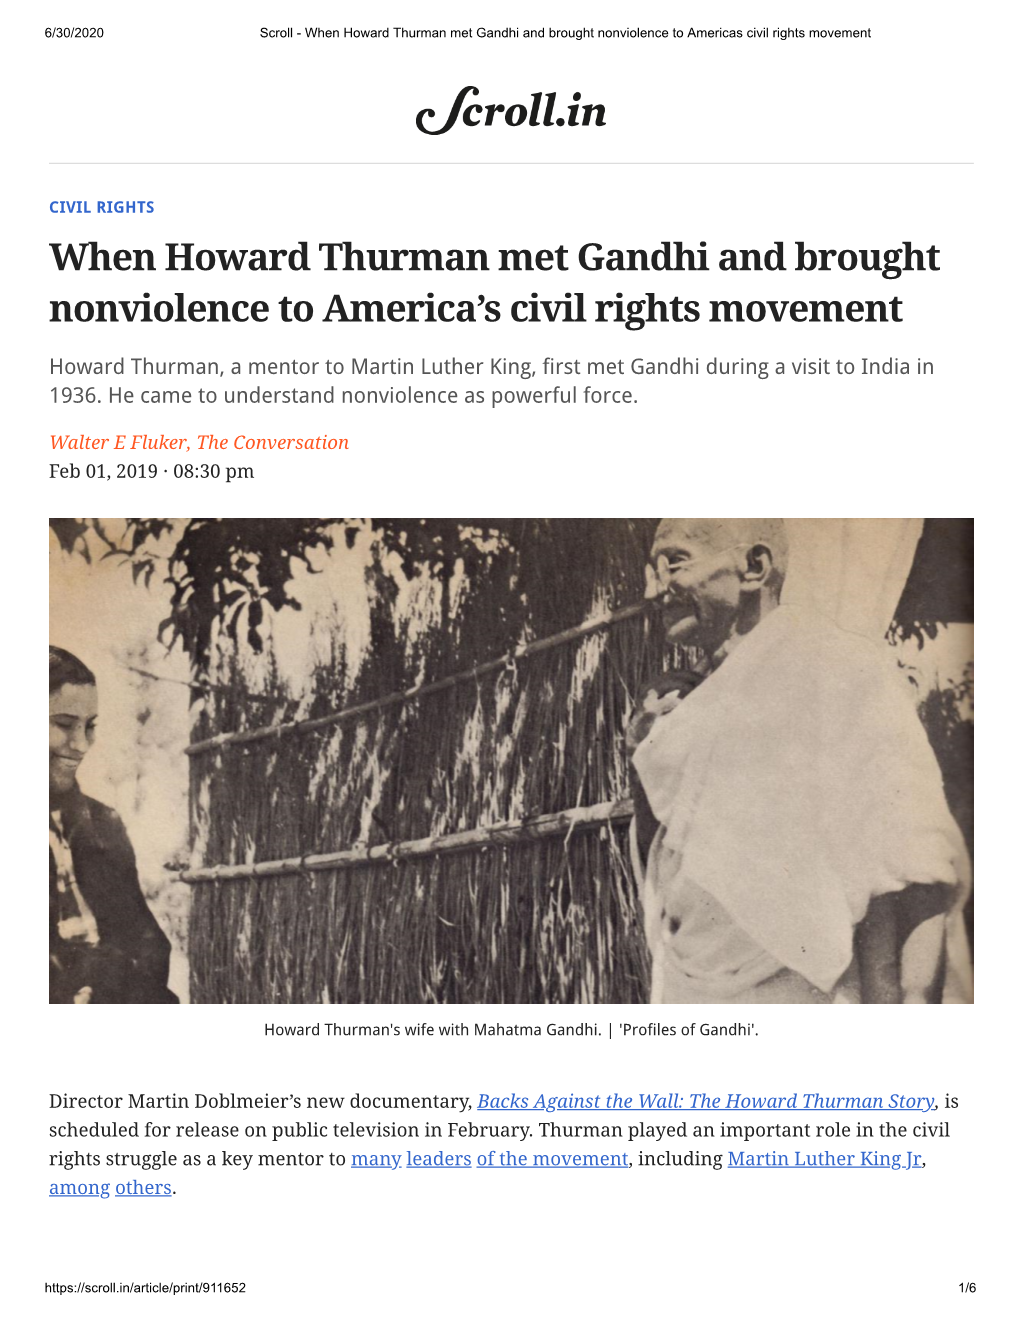 When Howard Thurman Met Gandhi and Brought Nonviolence to Americas Civil Rights Movement